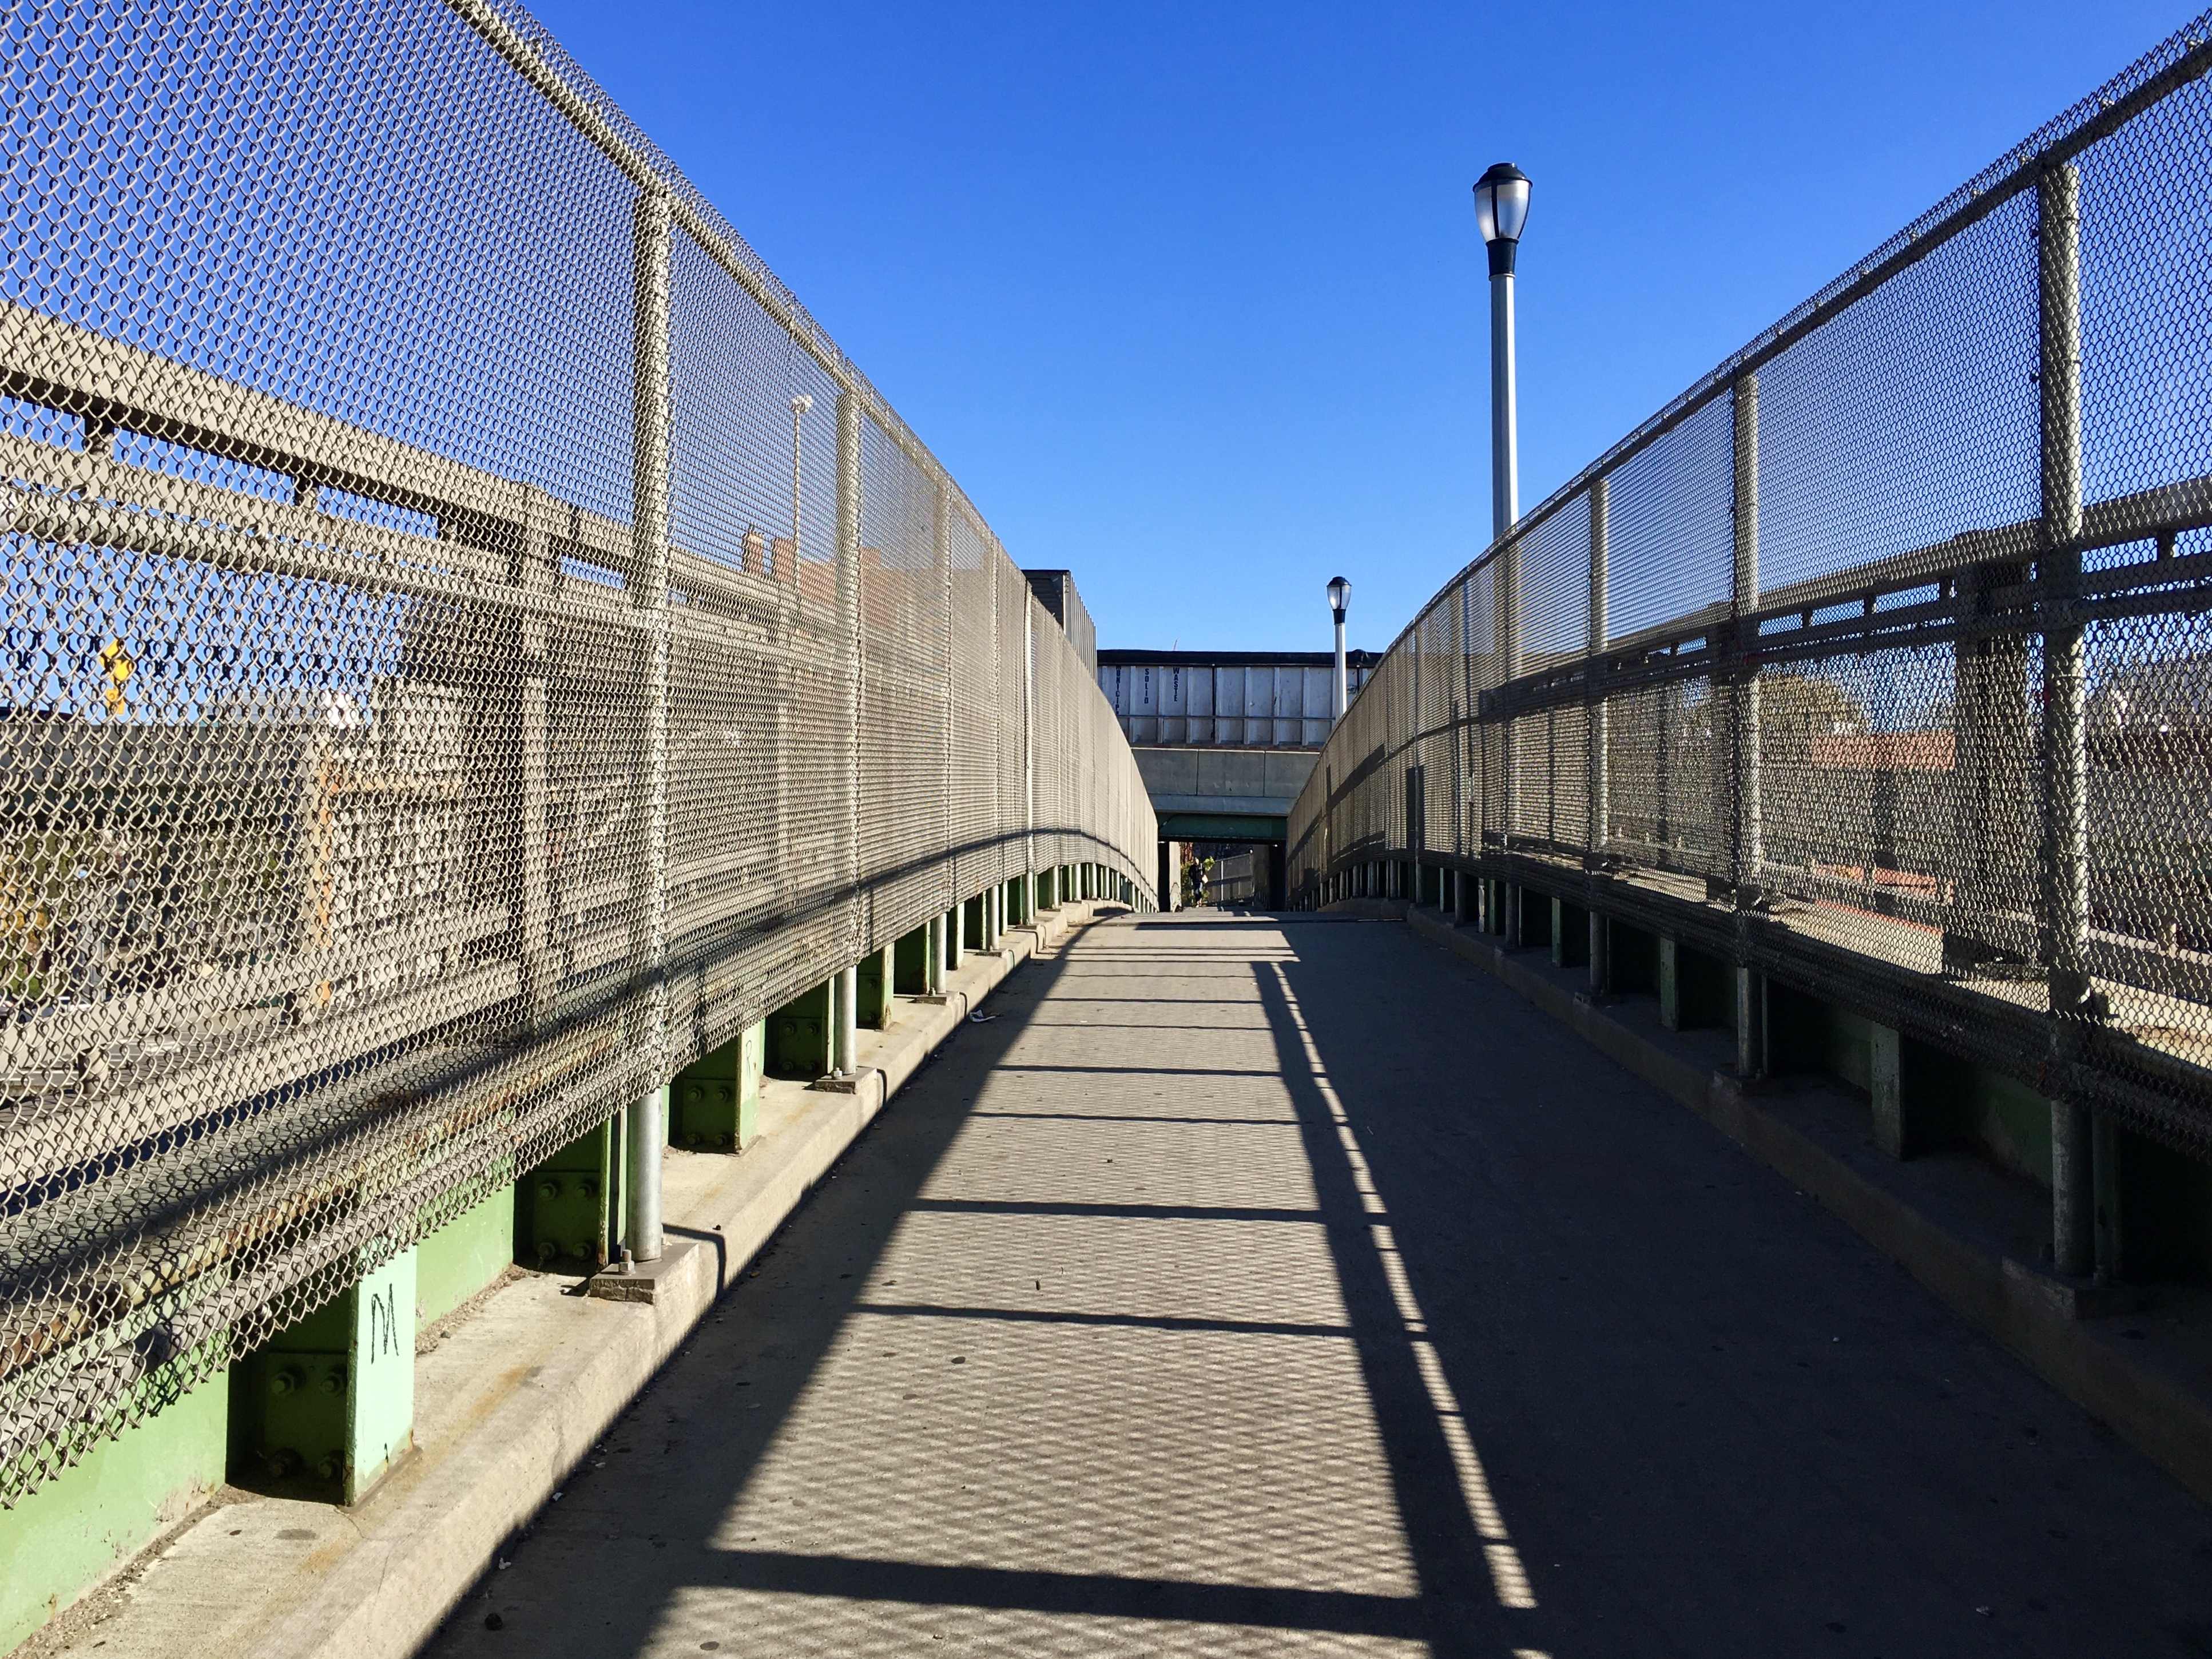 Did you know there’s a pedestrian overpass above the BQE that connects Red Hook and Carroll Gardens? Eagle photo by Lore Croghan